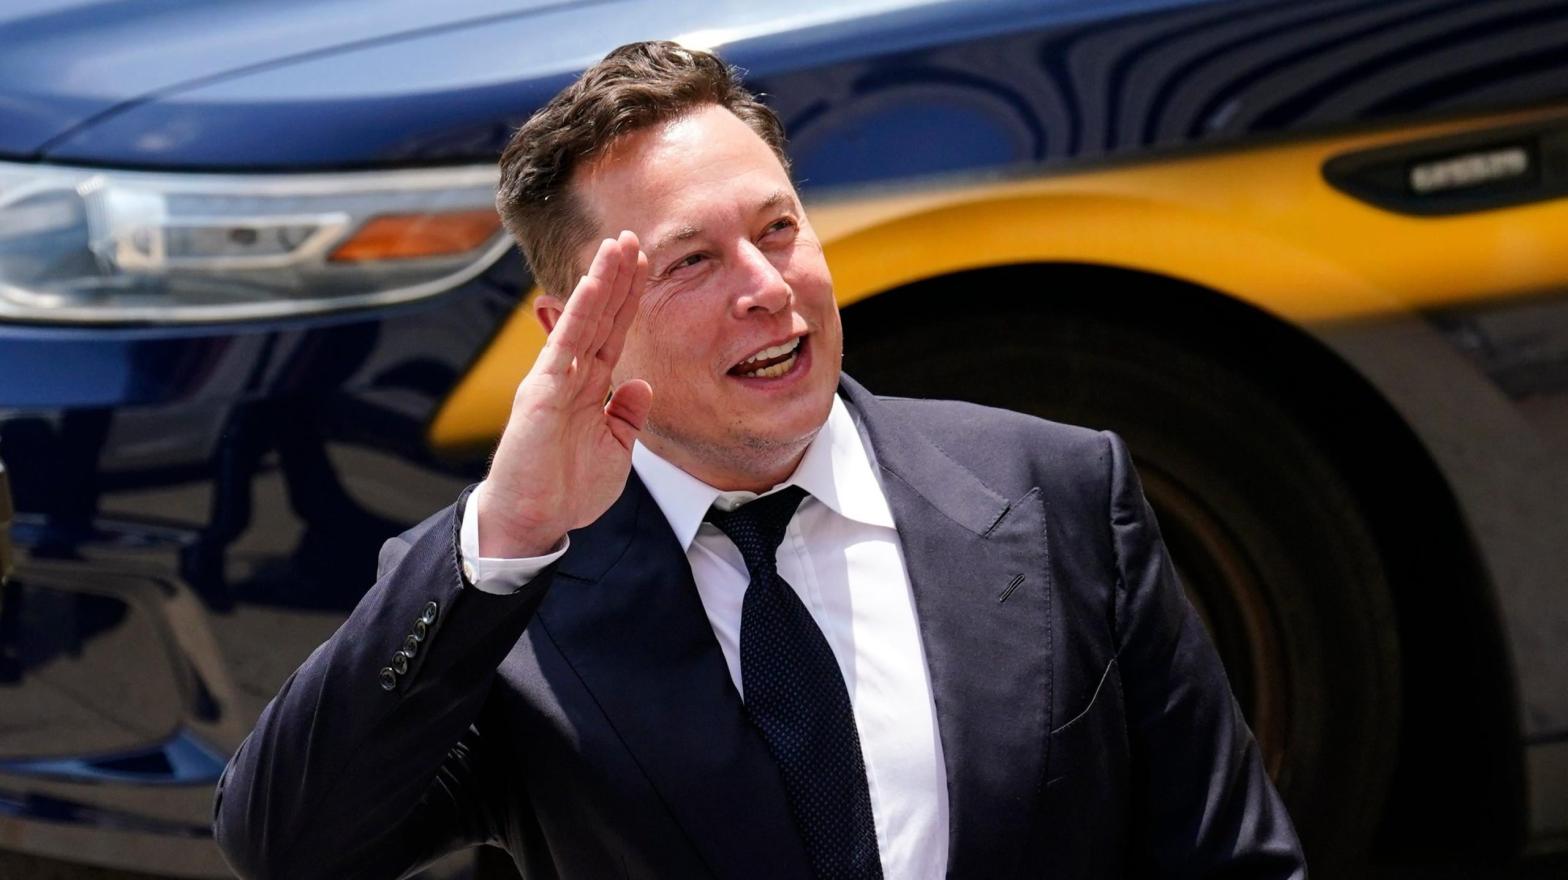 Elon Musk departs from the justice centre in Wilmington, Delaware on July 13, 2021. (Photo: Matt Rourke, AP)